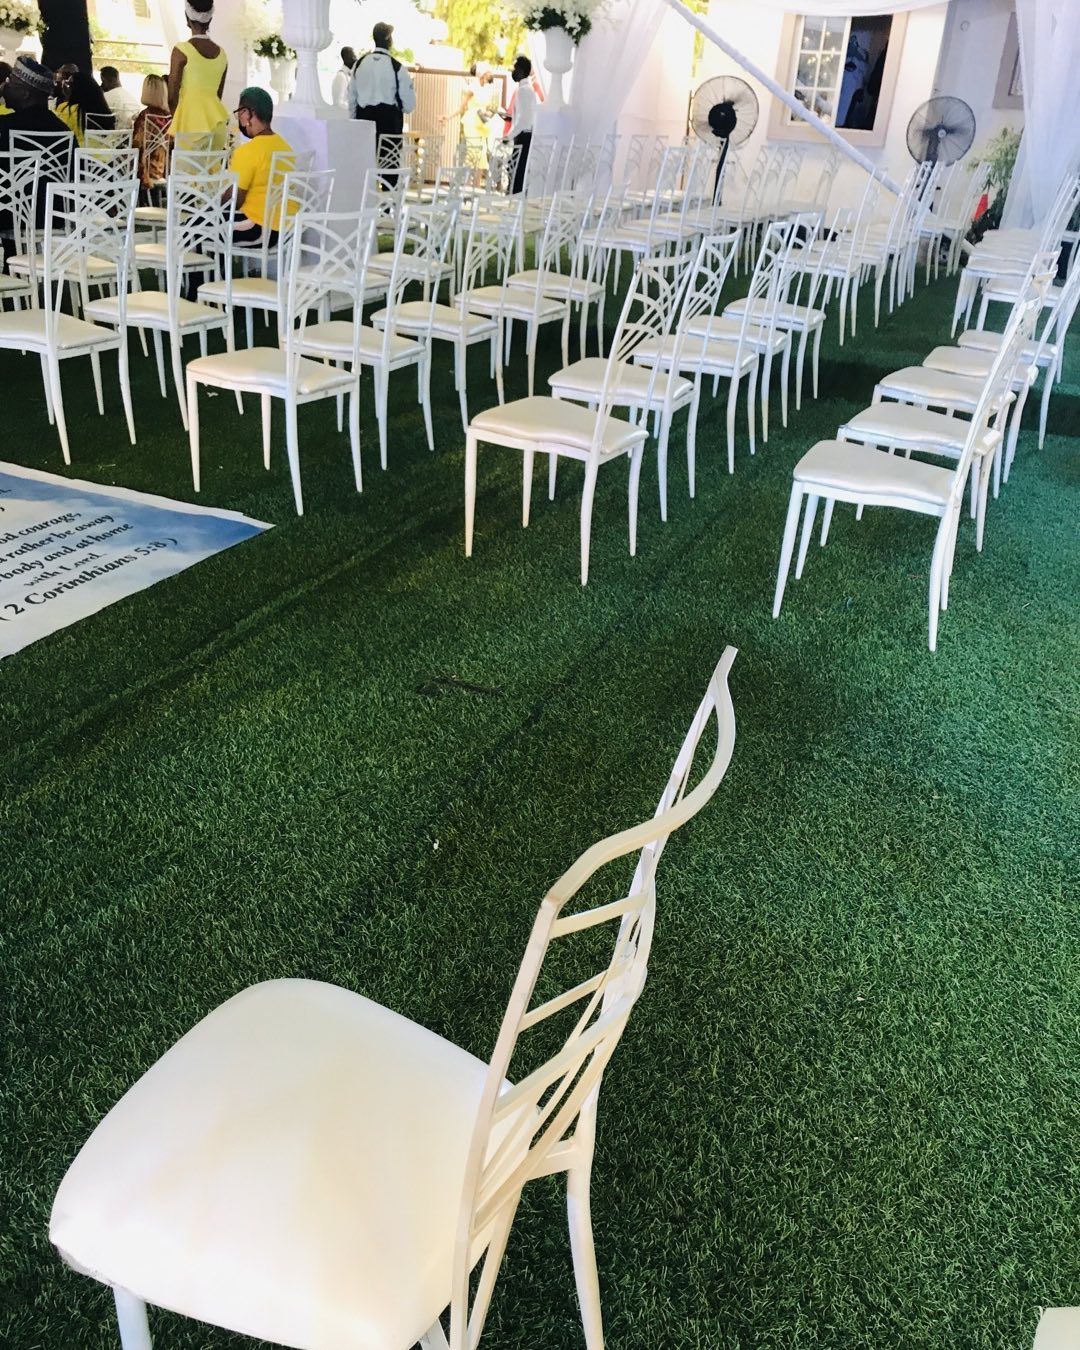 273616419 1000394803900555 3348767649149846686 n - For all your chairs needs

WE ARE HERE 

We rent all kinds of party and lounge chairs. 

Send us a D...